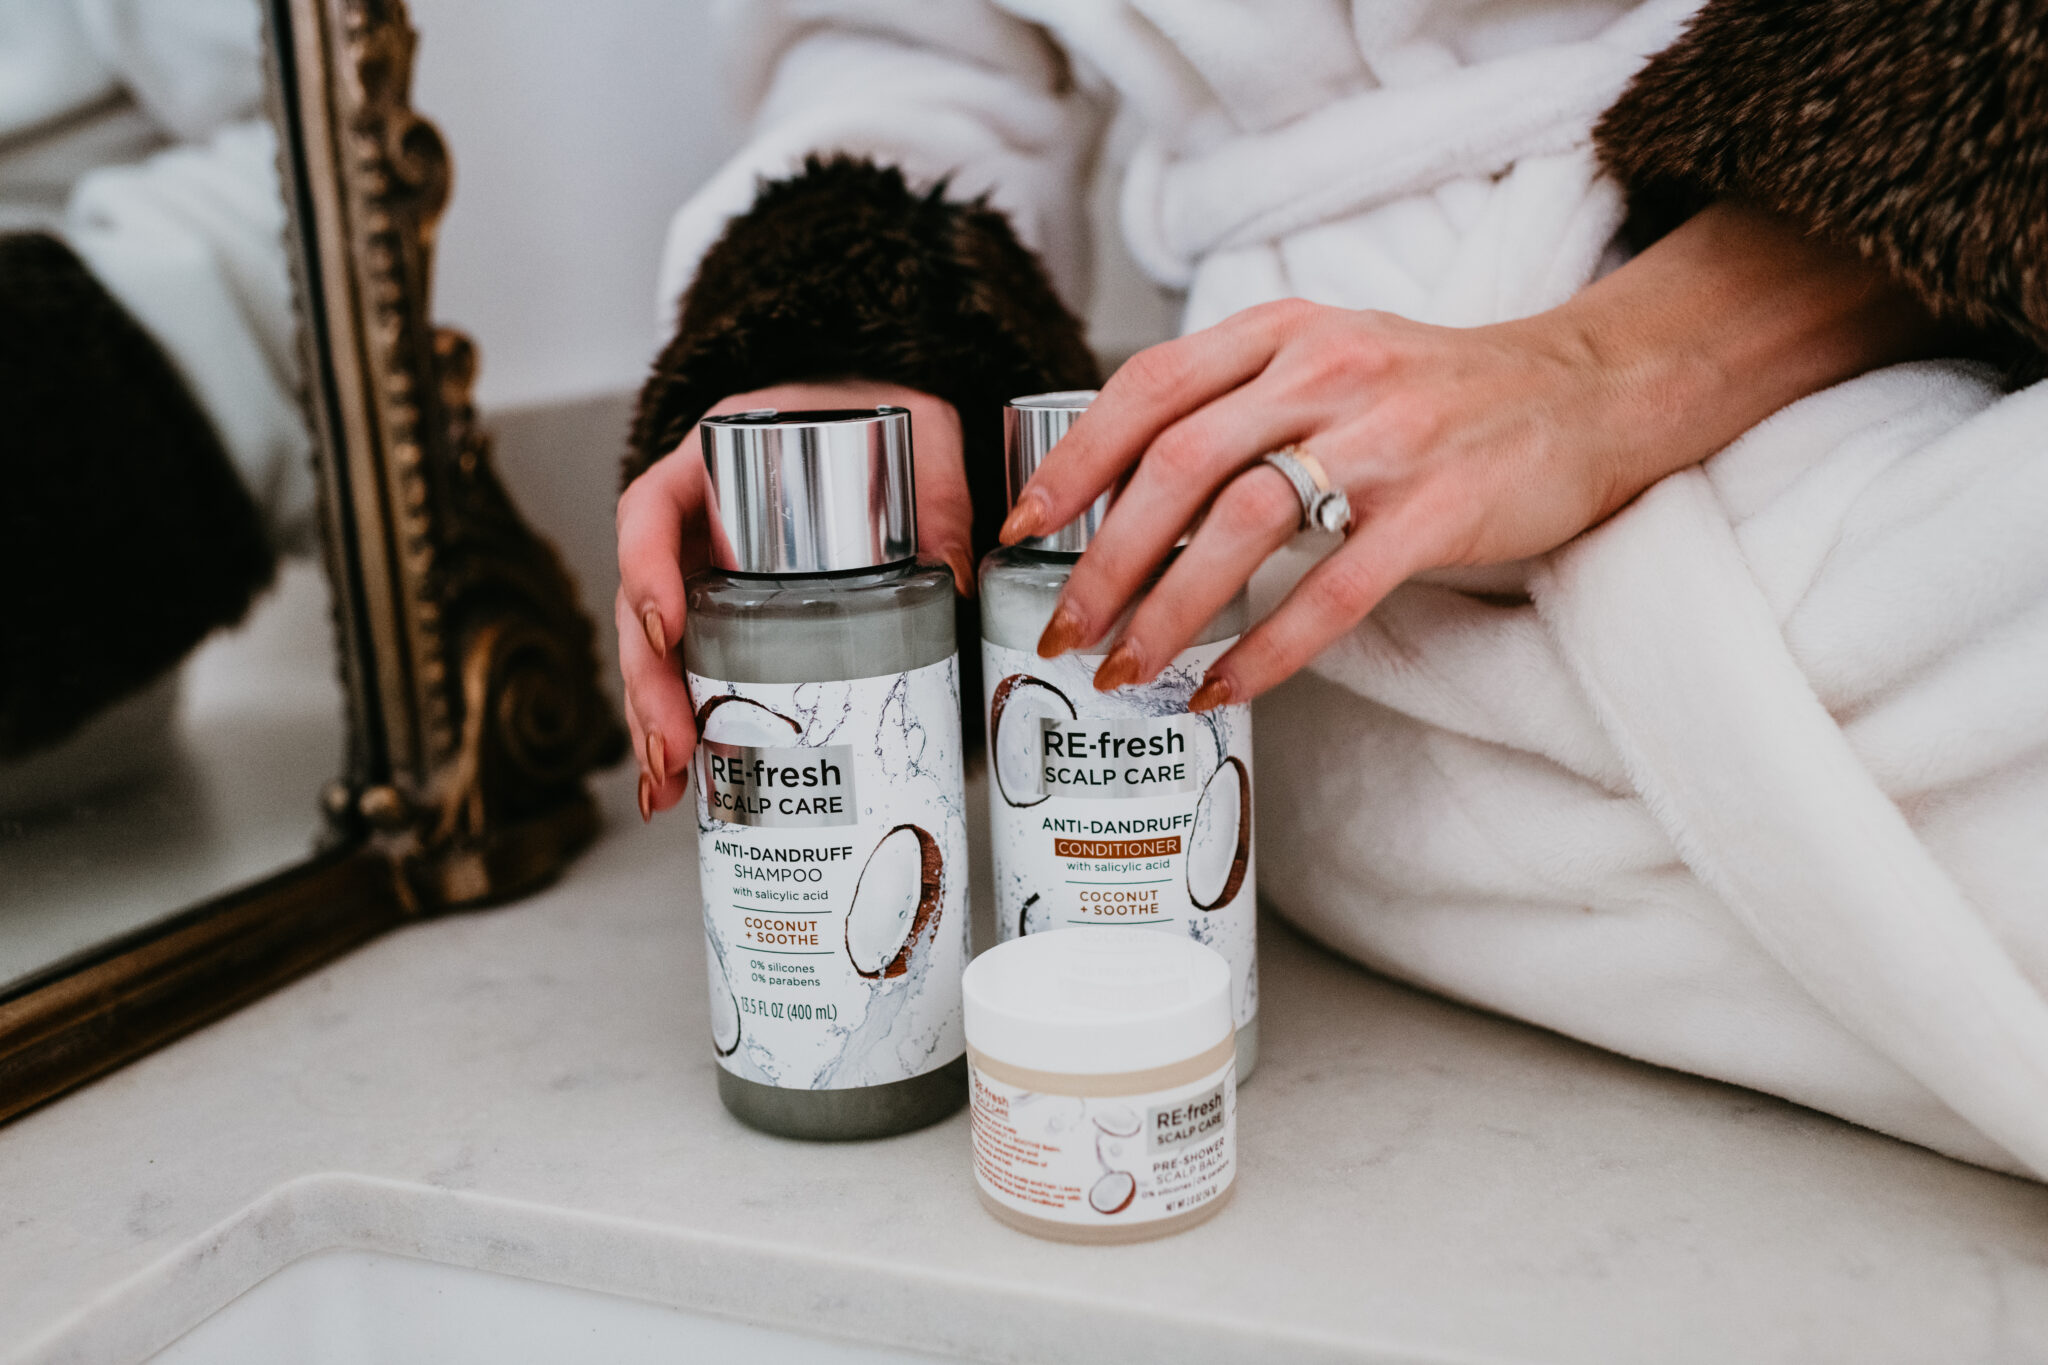 Re-fresh scalp care review: the best products for dandruff. A review featured by top Las Vegas beauty blog, Outfits and Outings | Re-Fresh Scalp Care by popular Las Vegas hair and beauty blog, Outfits and Outings: image of Re-Fresh Scalp Care anti-dandruff shampoo and conditioner. 